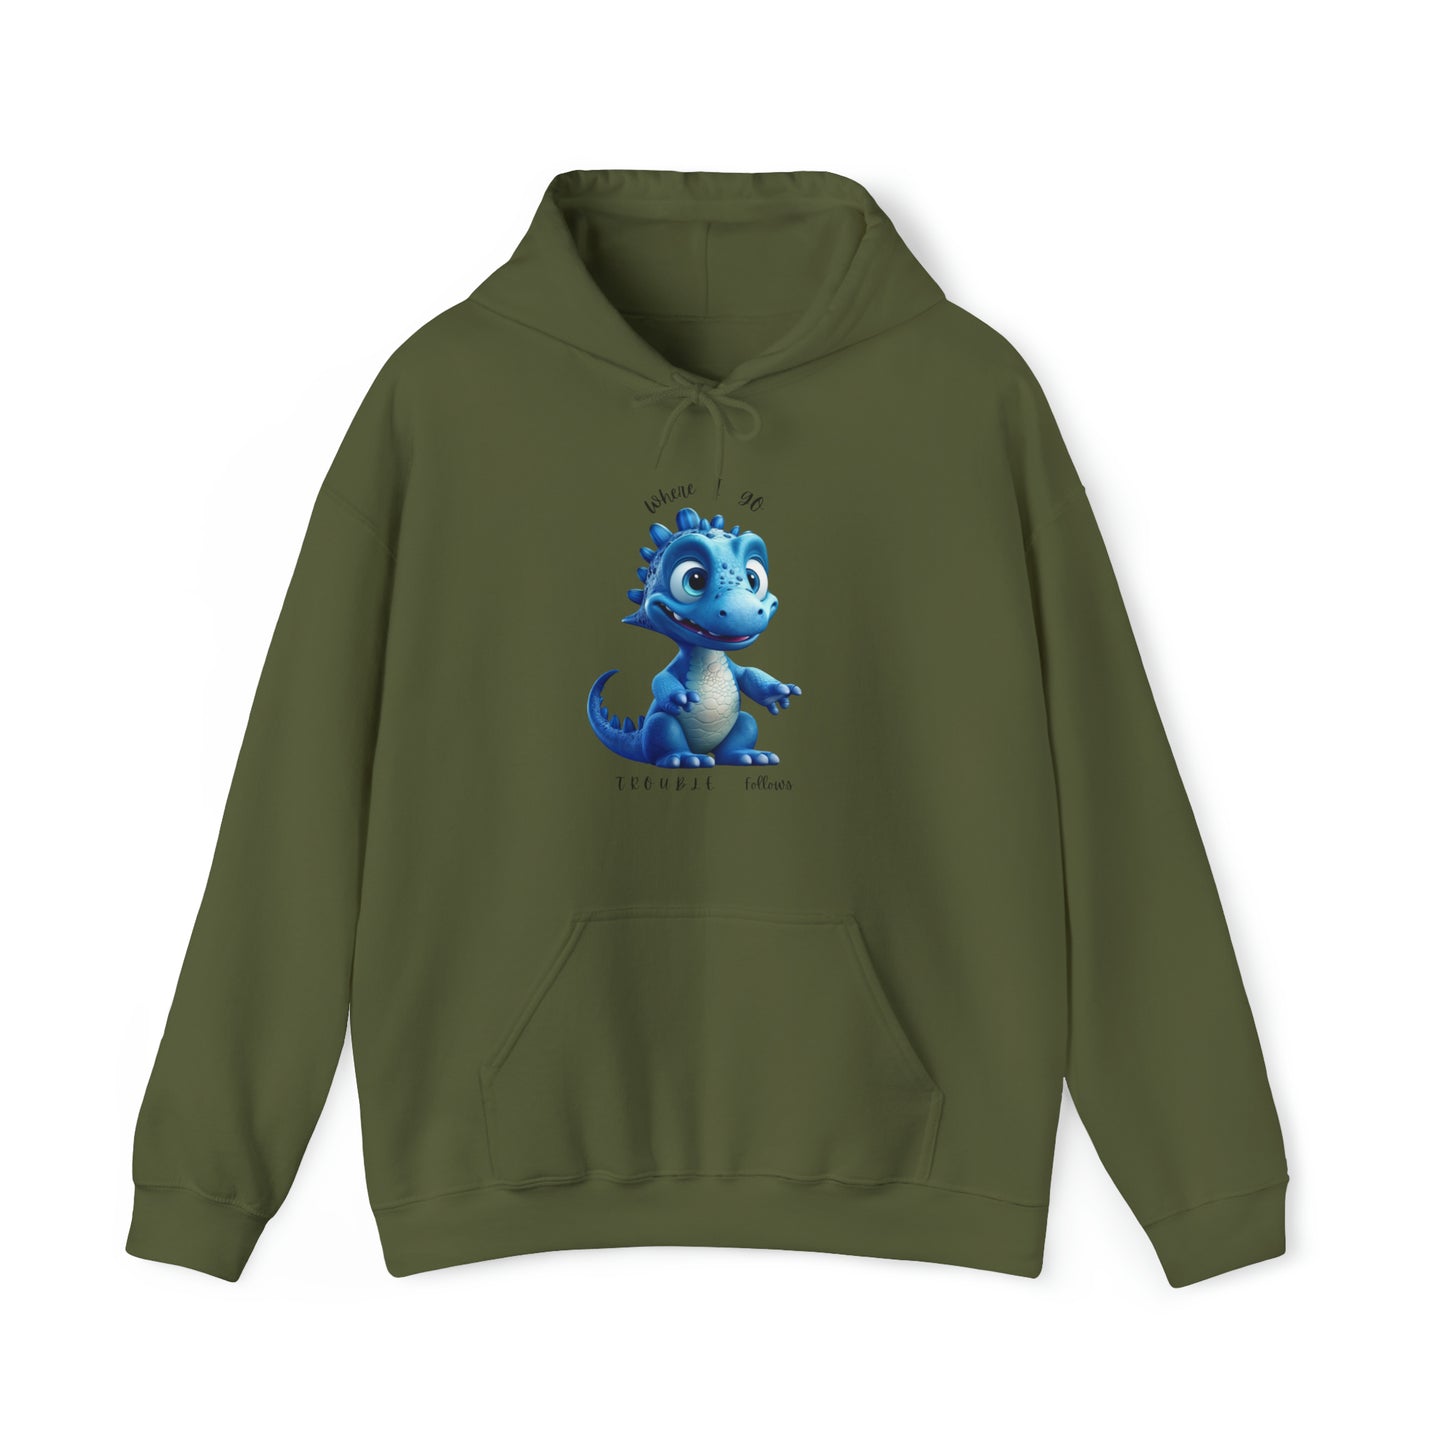 Where I Go Trouble Follows Blue Dino Couples Matching  Hoodie